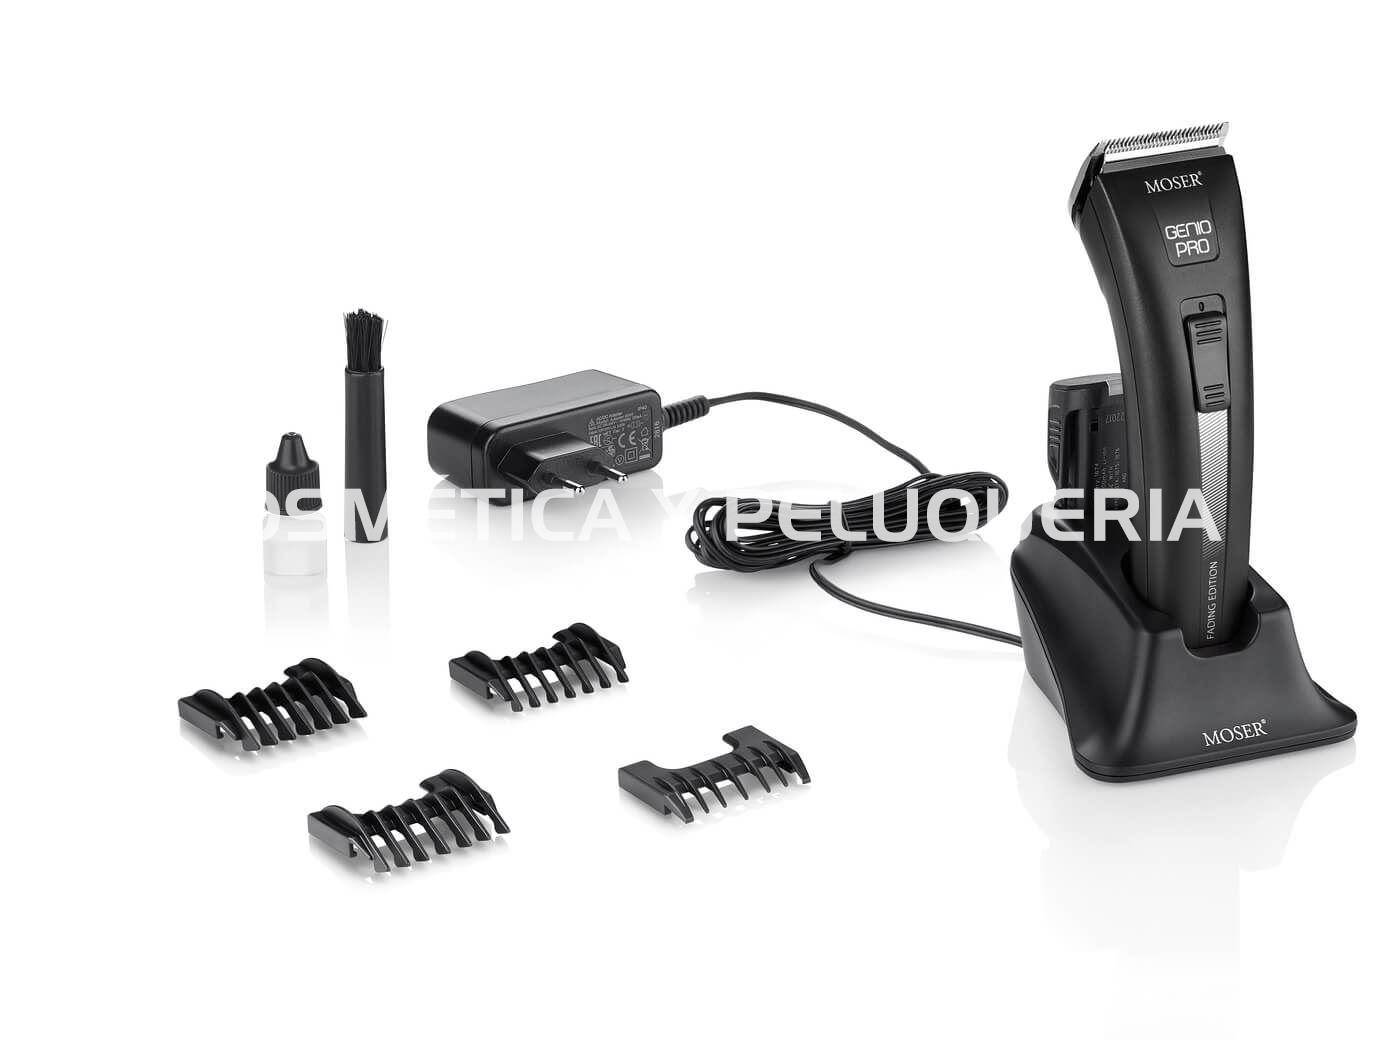 MOSER Profesional Hair Clipper Genio PRO 1874-0050 with Interchangeable Battery Pack 並行輸入品